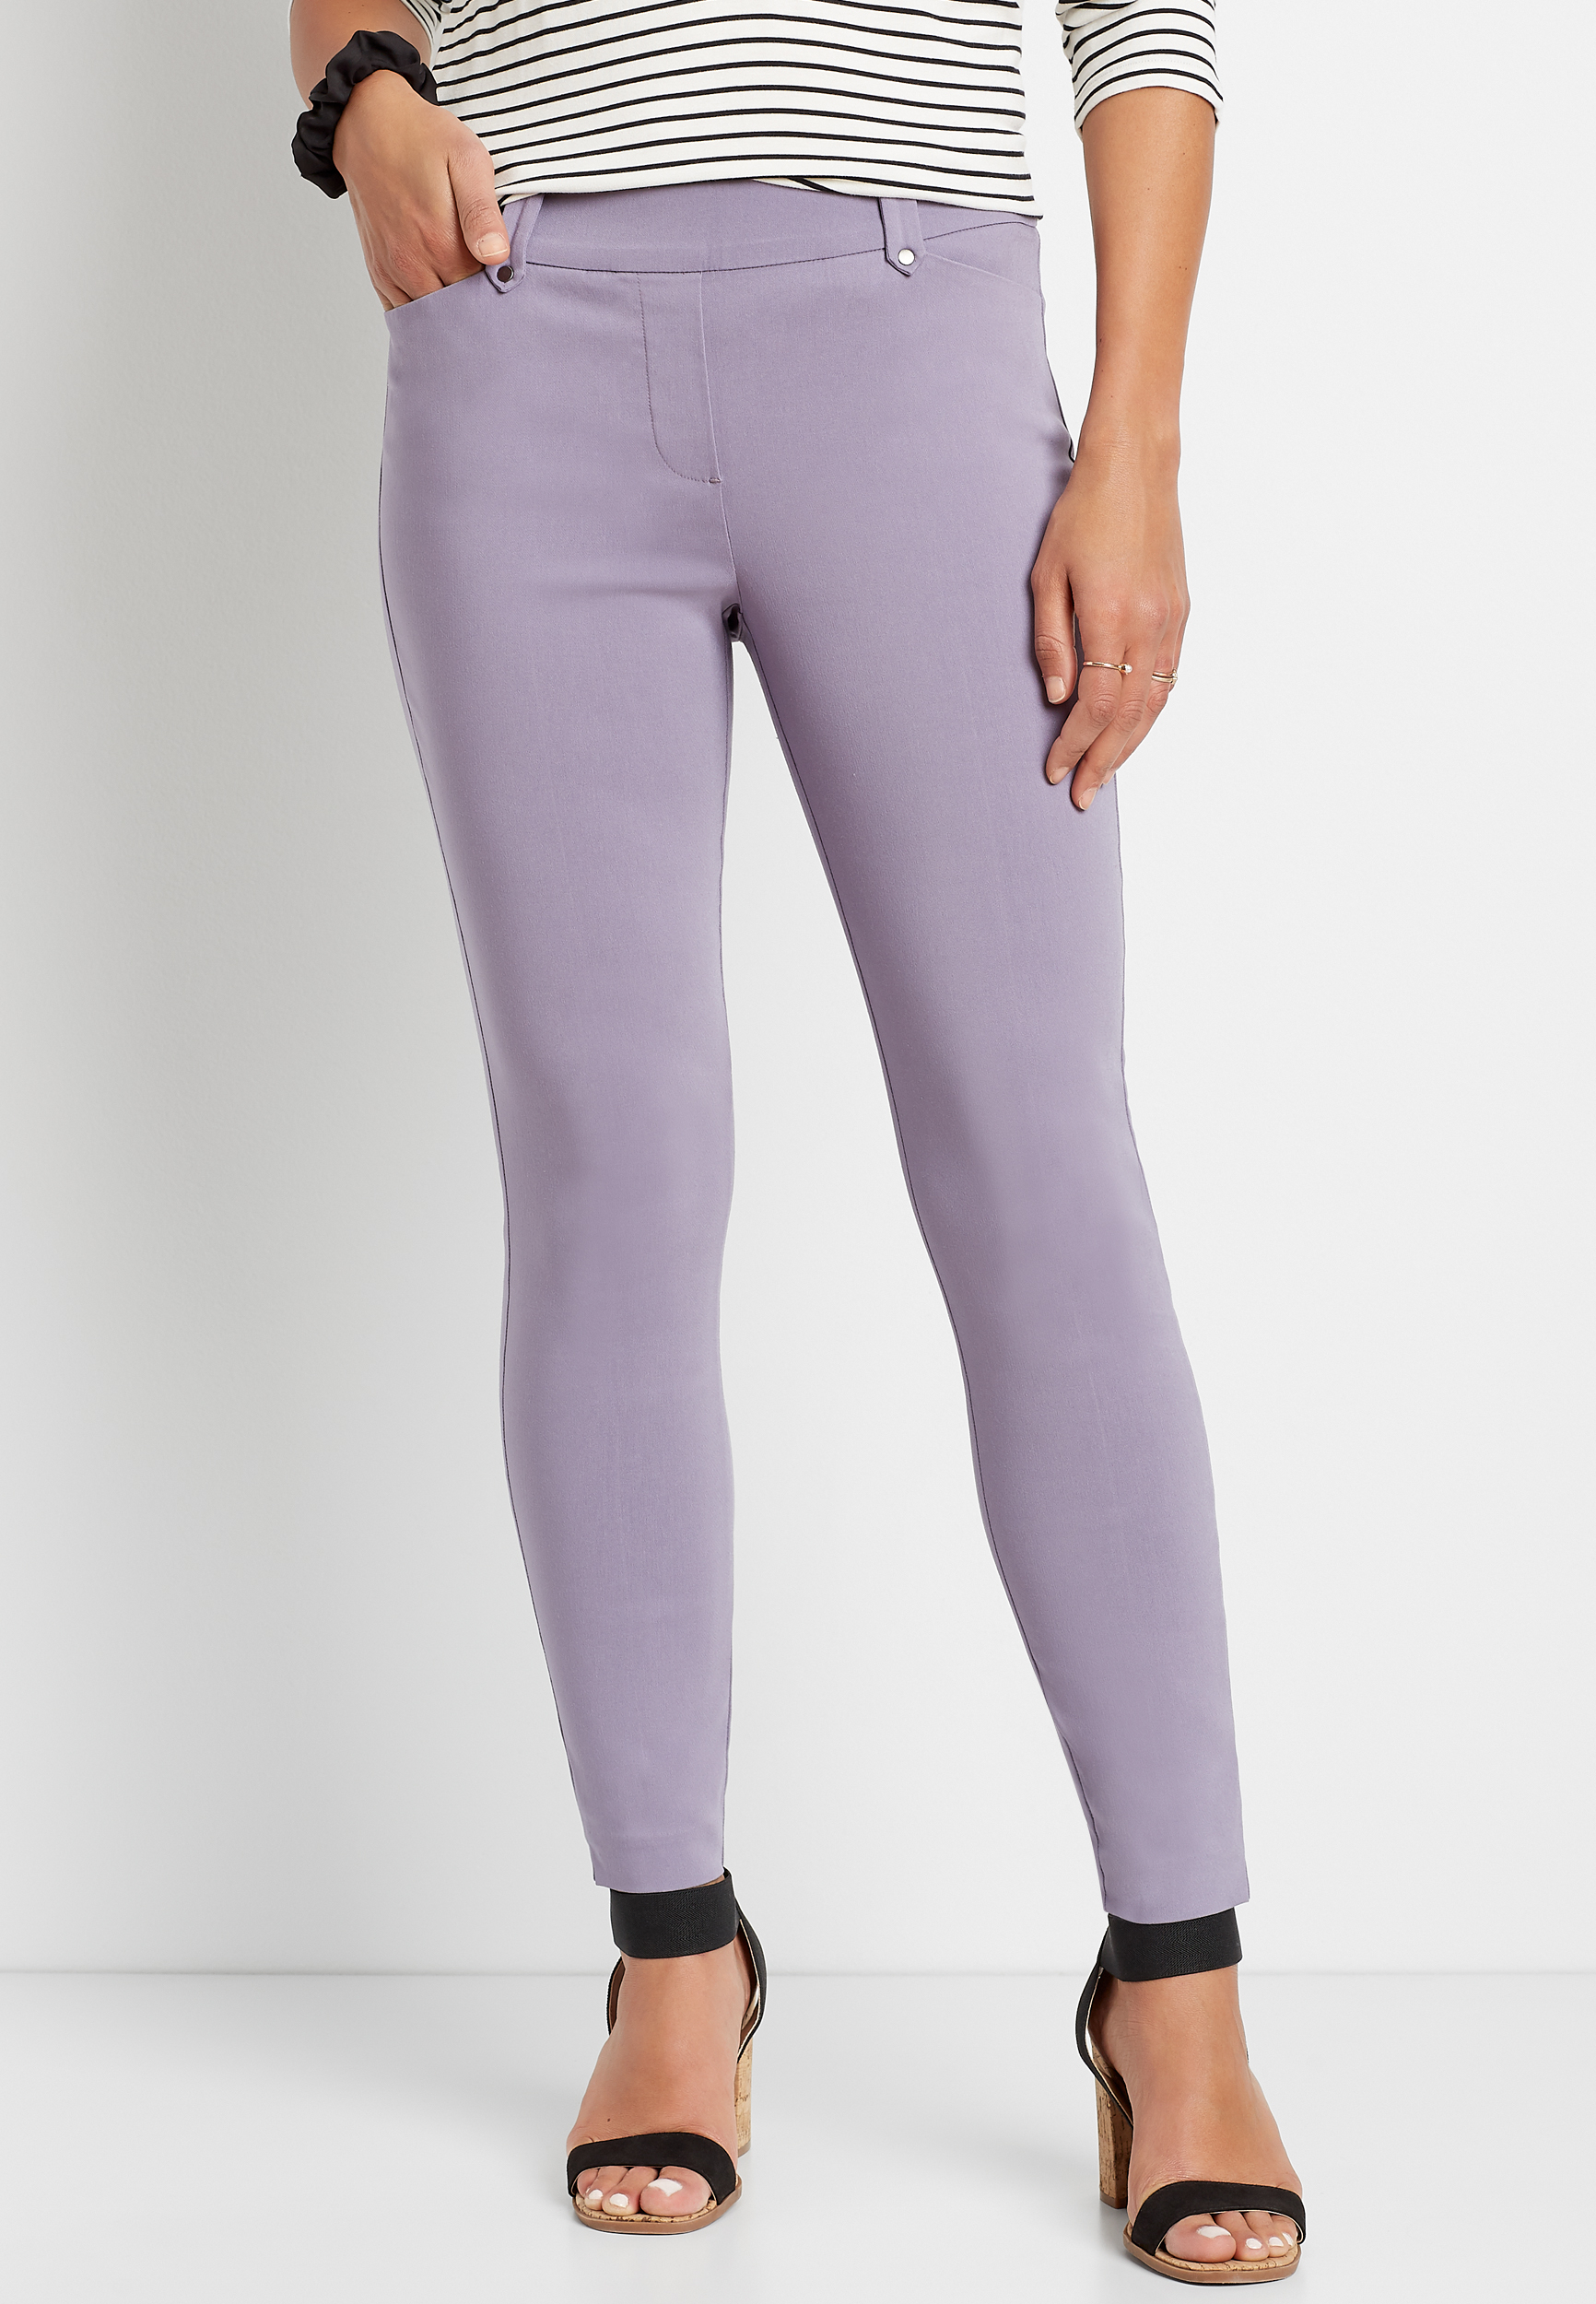 Lavender Bengaline Skinny Ankle Pant | maurices